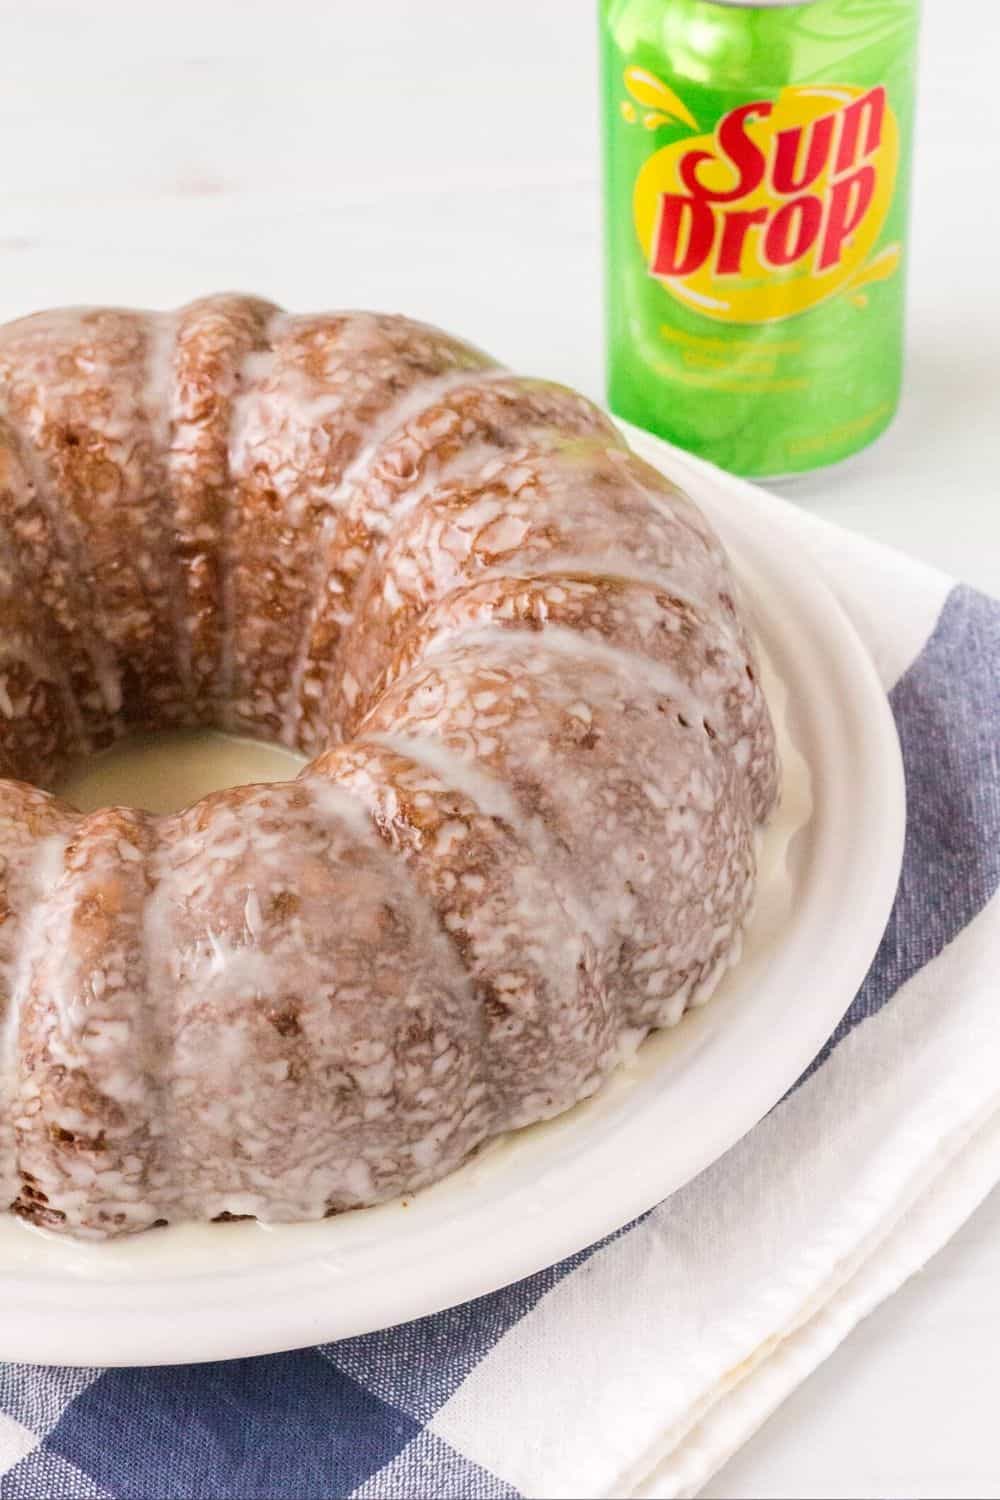 Glazed southern Sun Drop bundt cake on a white plate, with a can of Sundrop in the background.